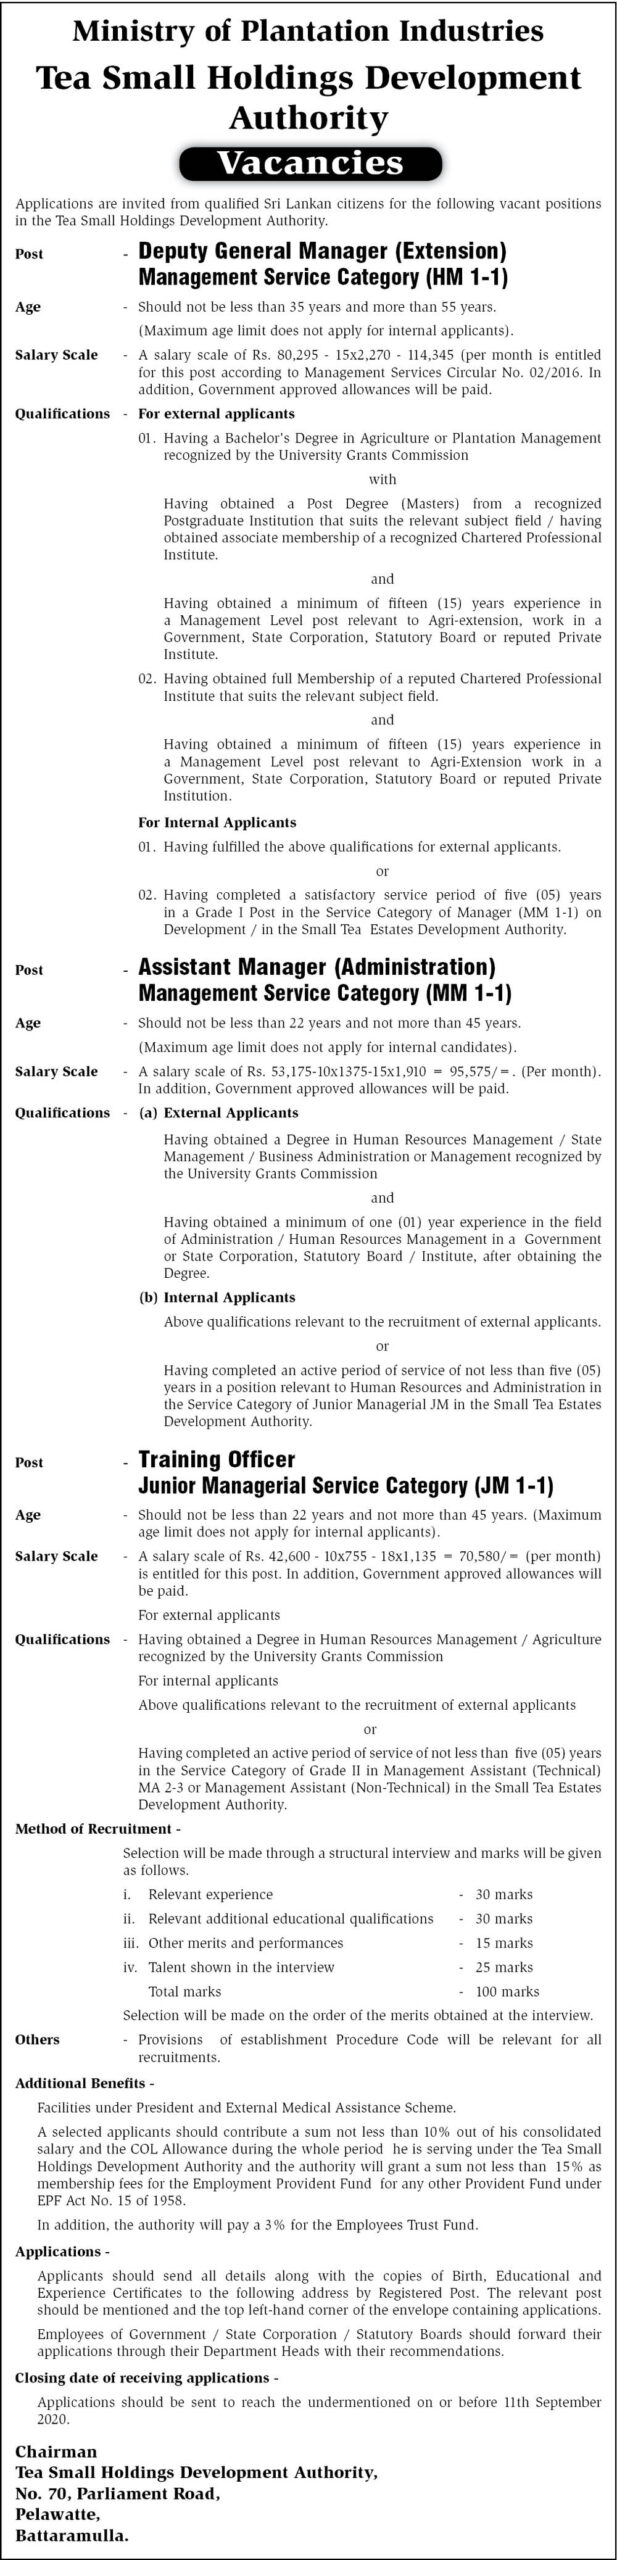 Deputy General Manager (Extension), Assistant Manager (Administration), Training Officer – Tea Small Holdings Development Authority 2